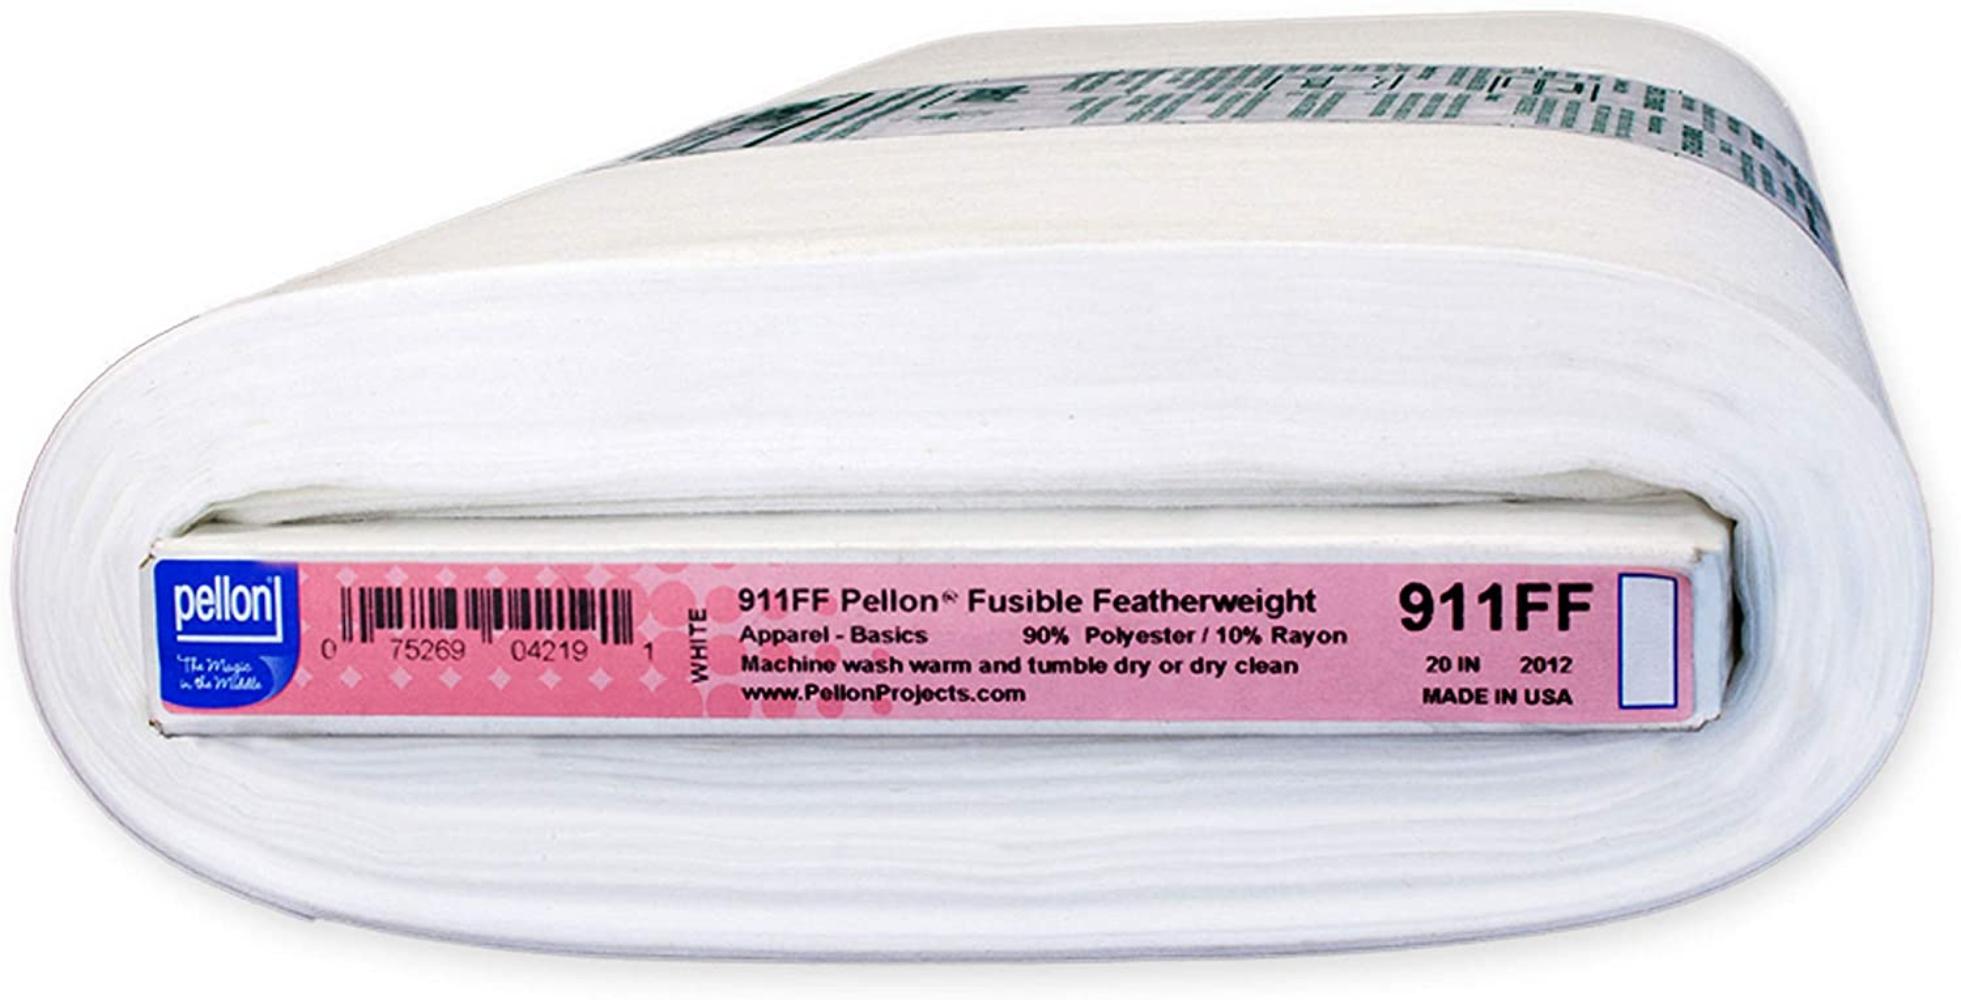 911FF - Featherweight Fusible Stabilizer